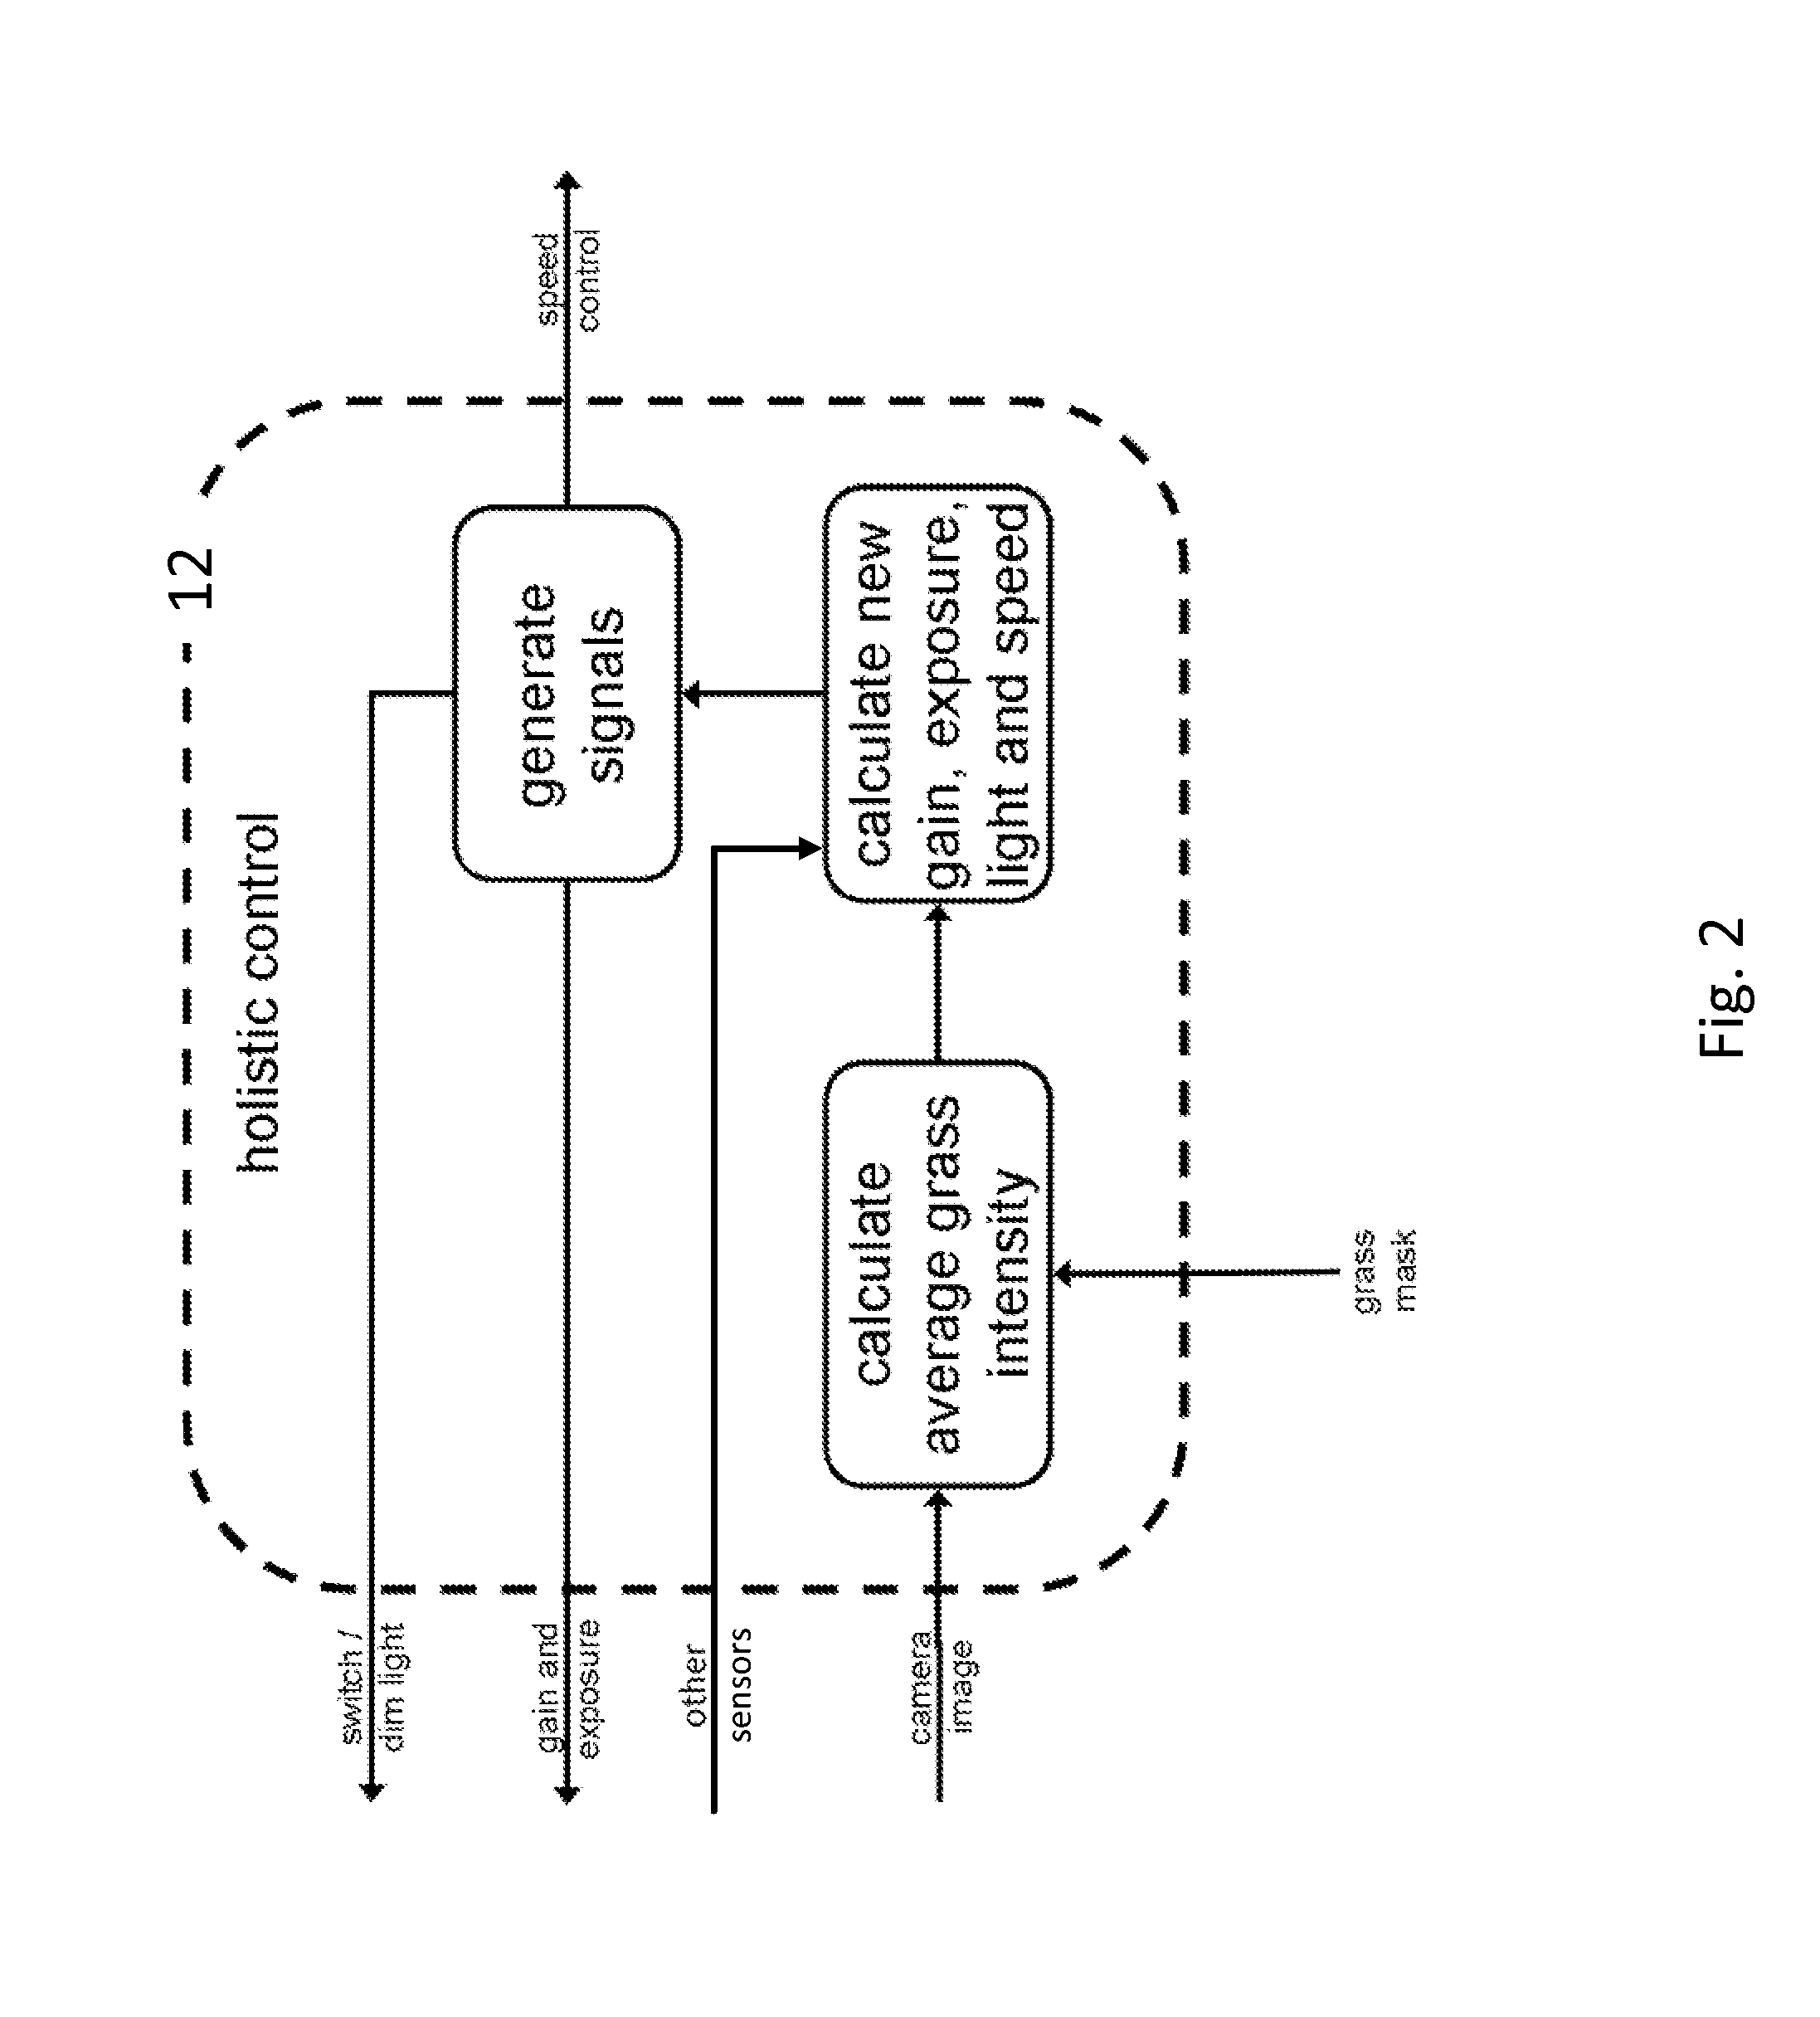 System, method and apparatus for unsupervised adaptation of the perception of an autonomous mower